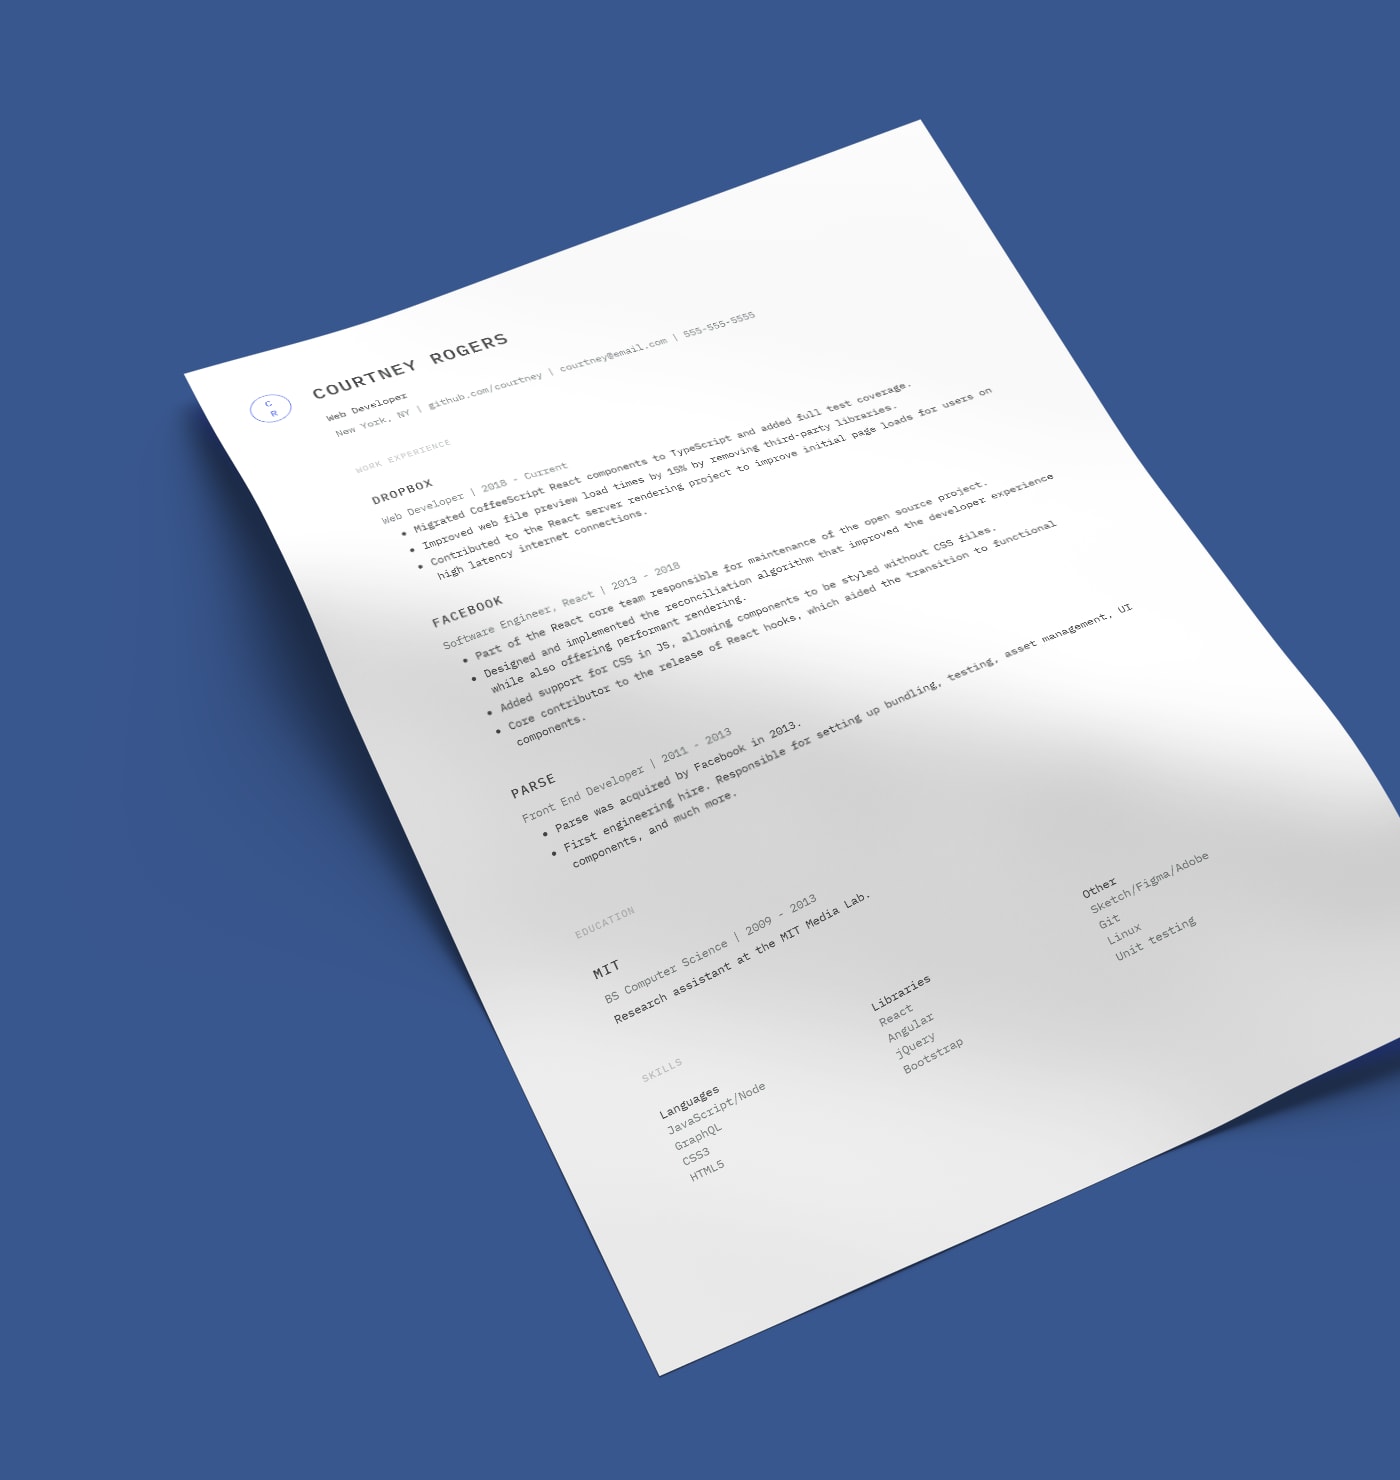 Keefer simple resume template created with Standard Resume builder.